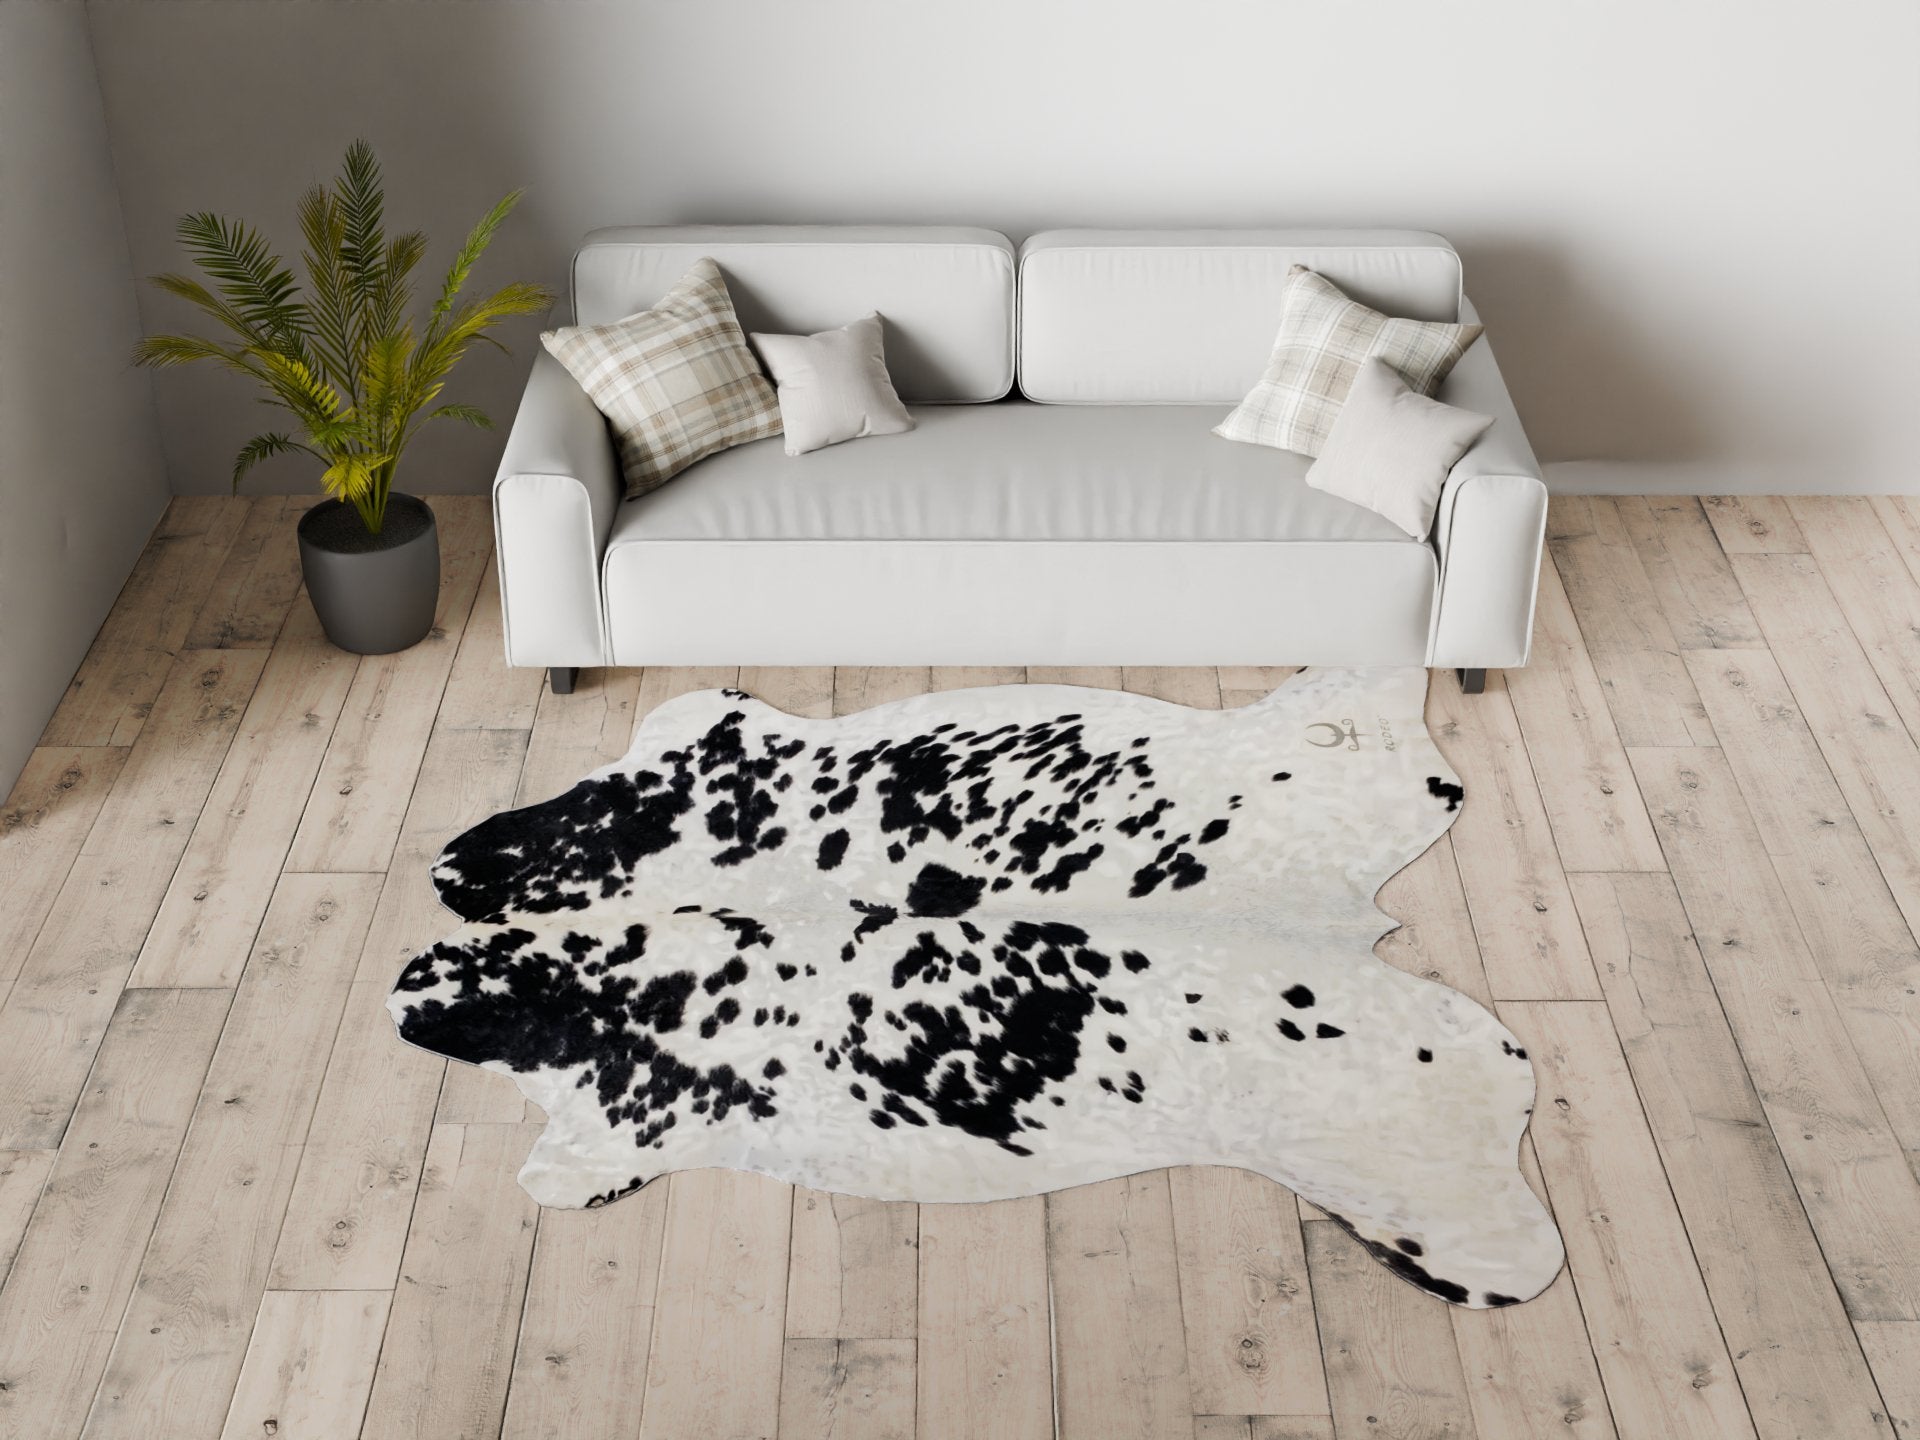 Black and White Cowhide Rug Size 7x7.8 ft---4667 - Rodeo Cowhide Rugs